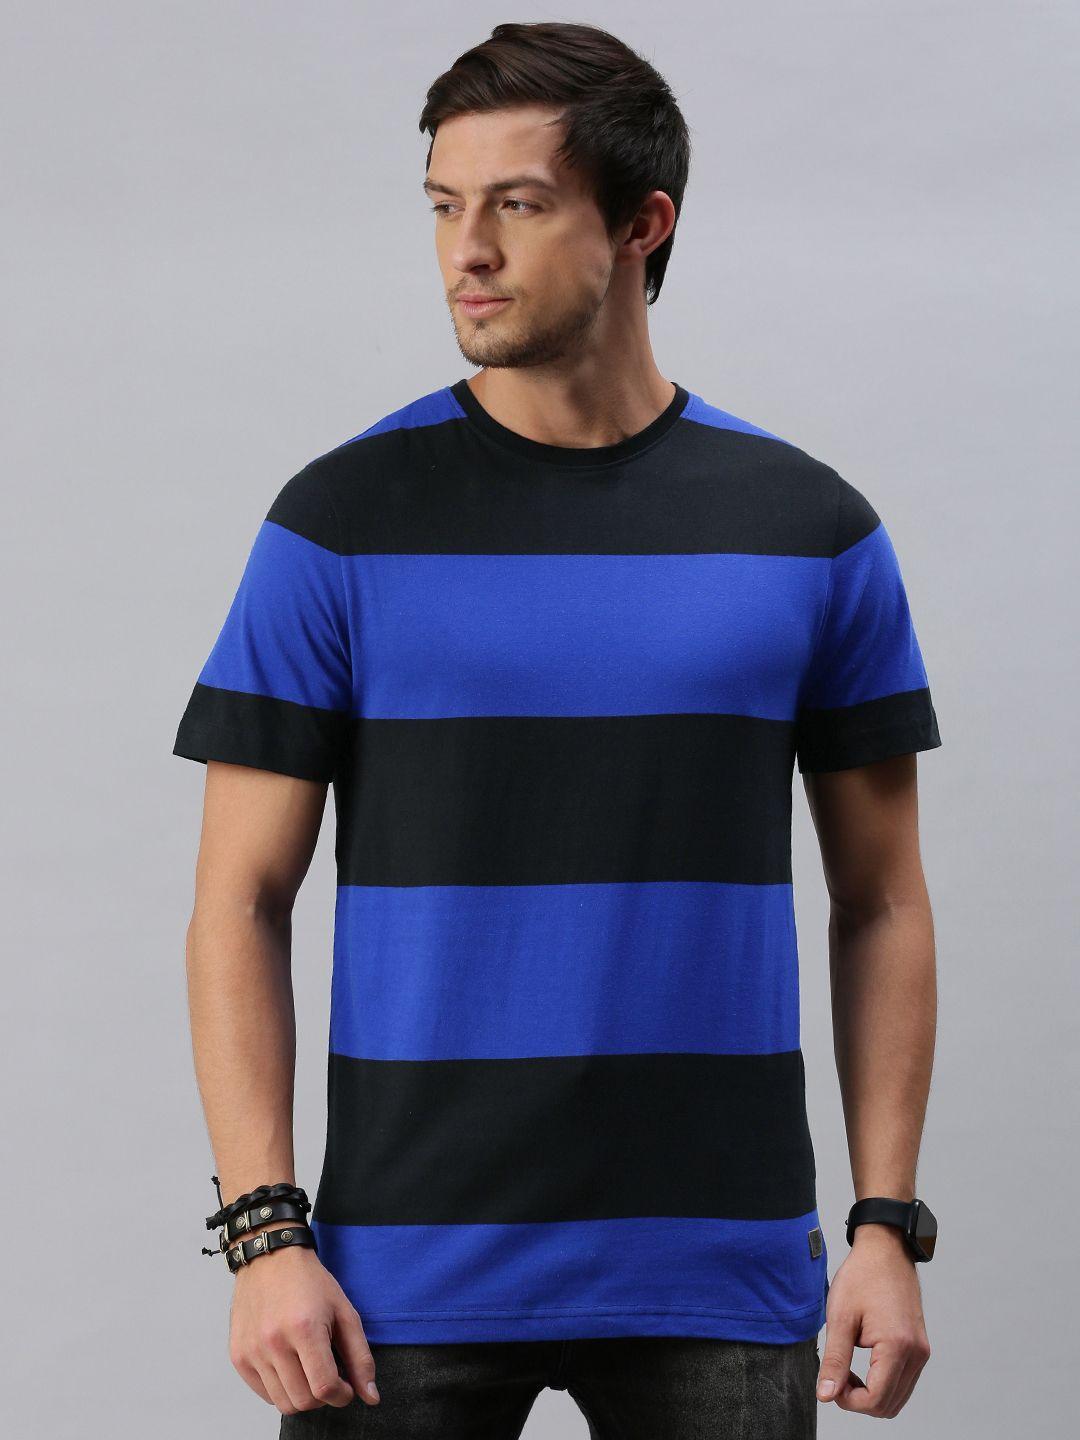 the roadster lifestyle co men blue striped round neck pure cotton t-shirt